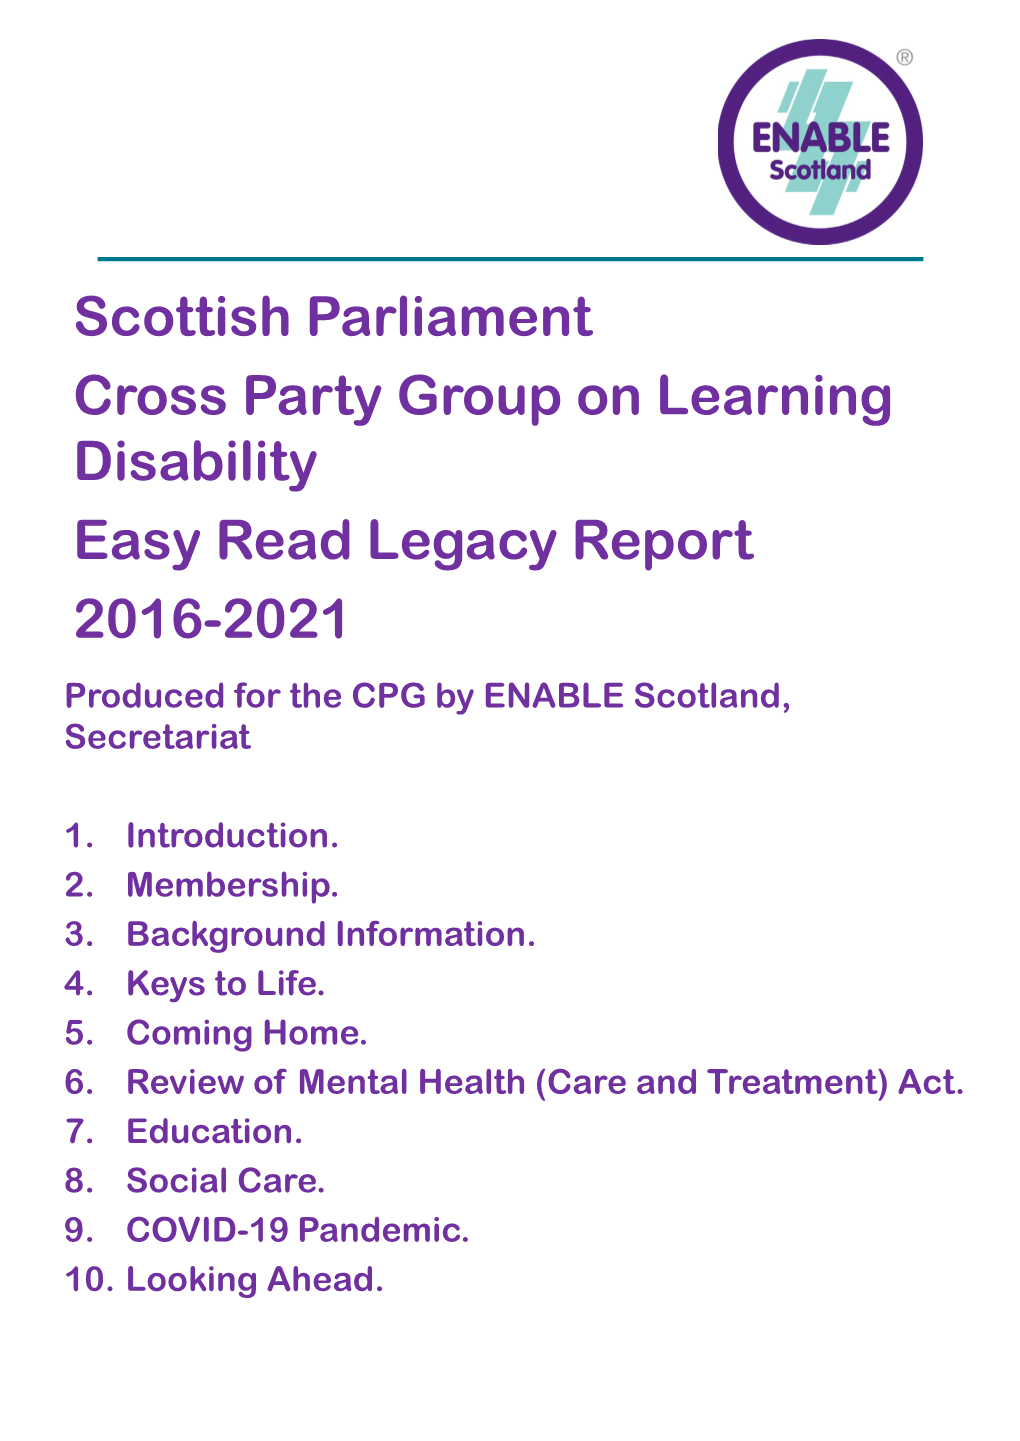 Scottish Parliament Cross Party Group on Learning Disability Easy Read Legacy Report 2016-2021 Produced for the CPG by ENABLE Scotland, Secretariat